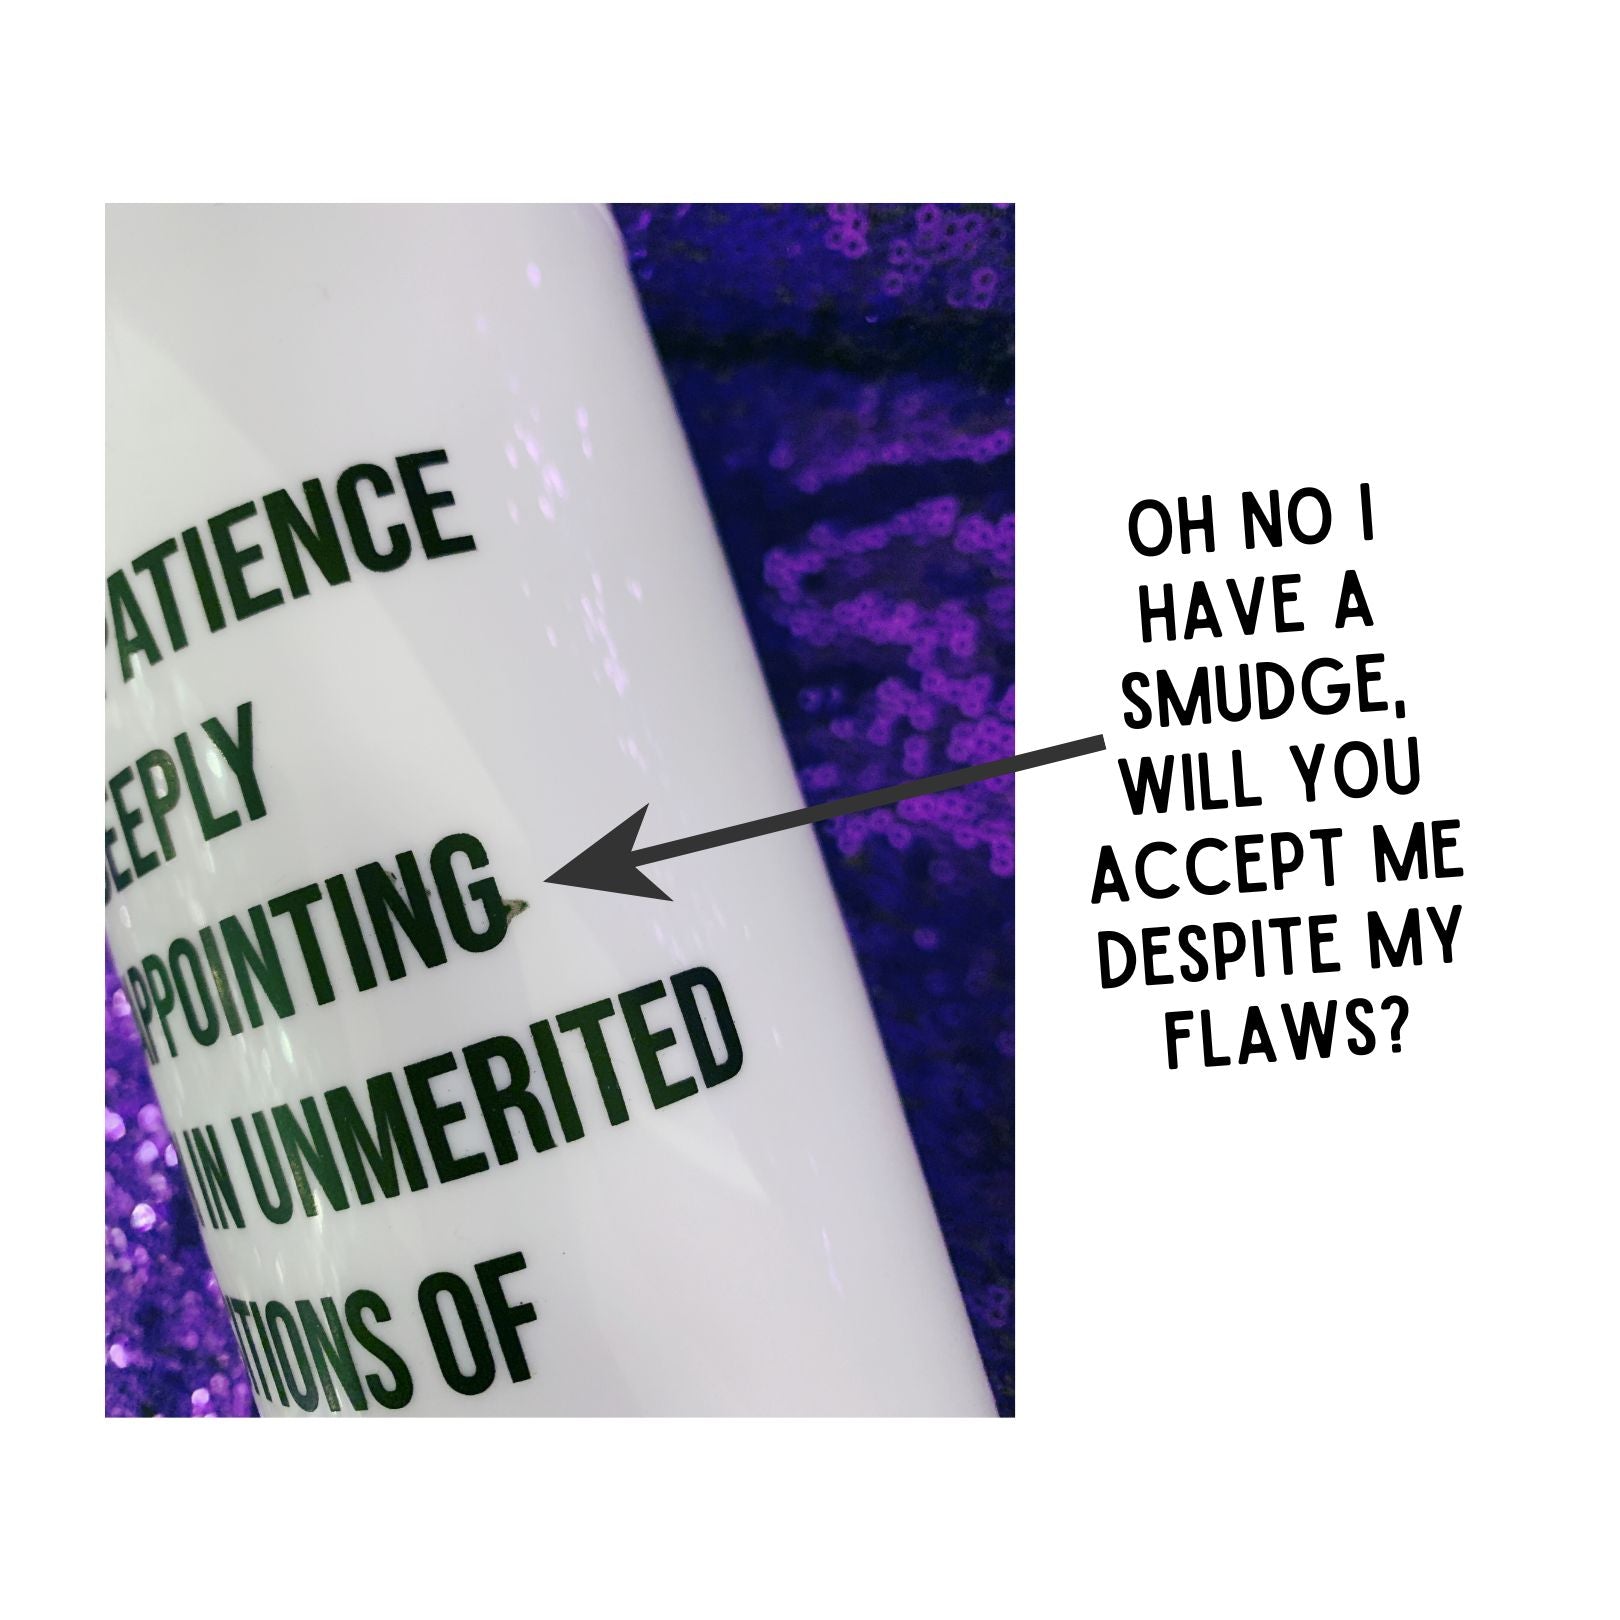 FACTORY SECONDS Out of Patience for Deeply Disappointing Men in Unmerited Positions of Authority Feminist Travel Mug in White - Irregular Print